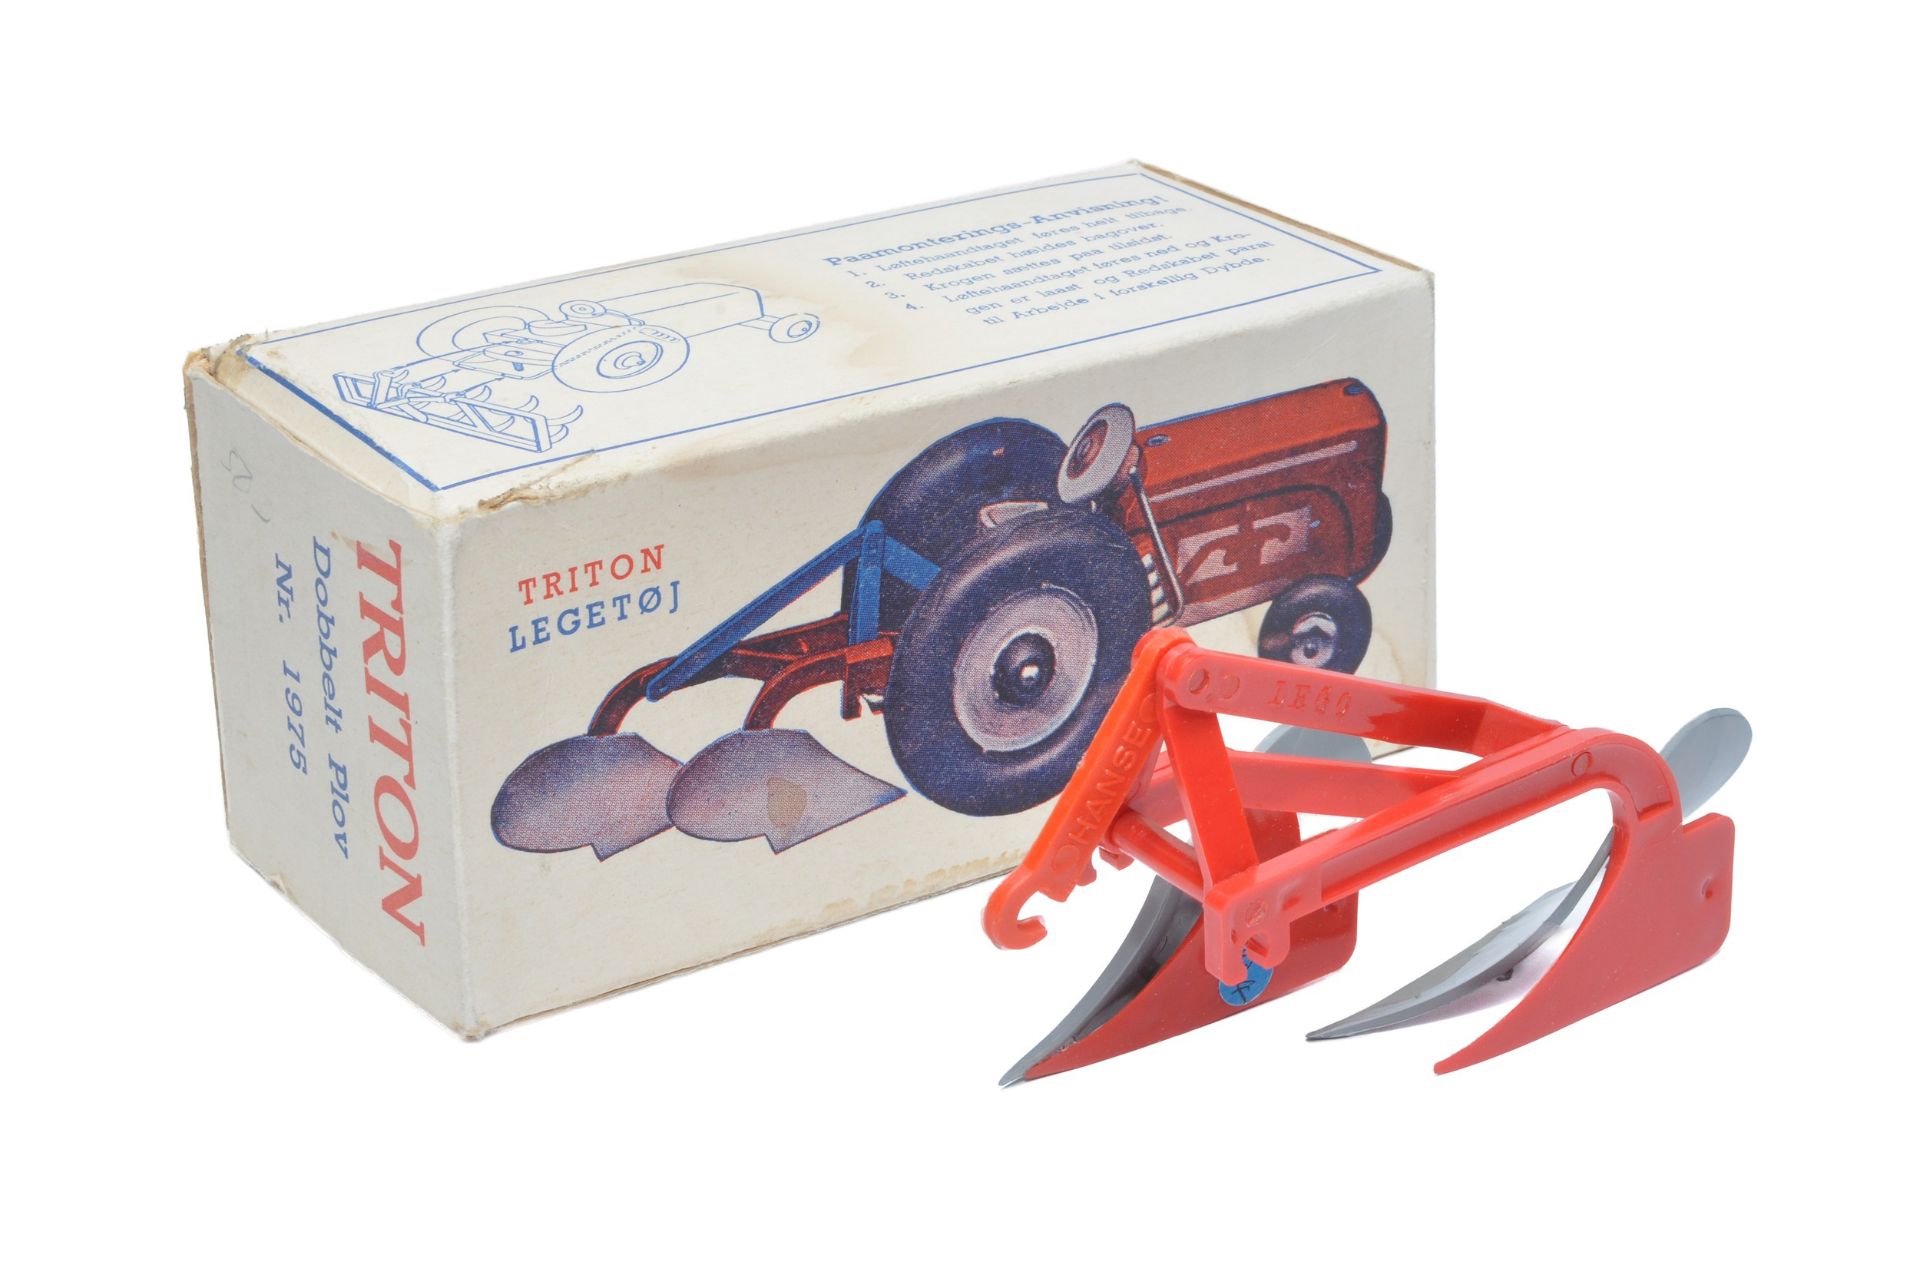 Triton (Denmark) No. 1975 plough for the Lego wooden Tractor. Note: Lego used the Triton factory